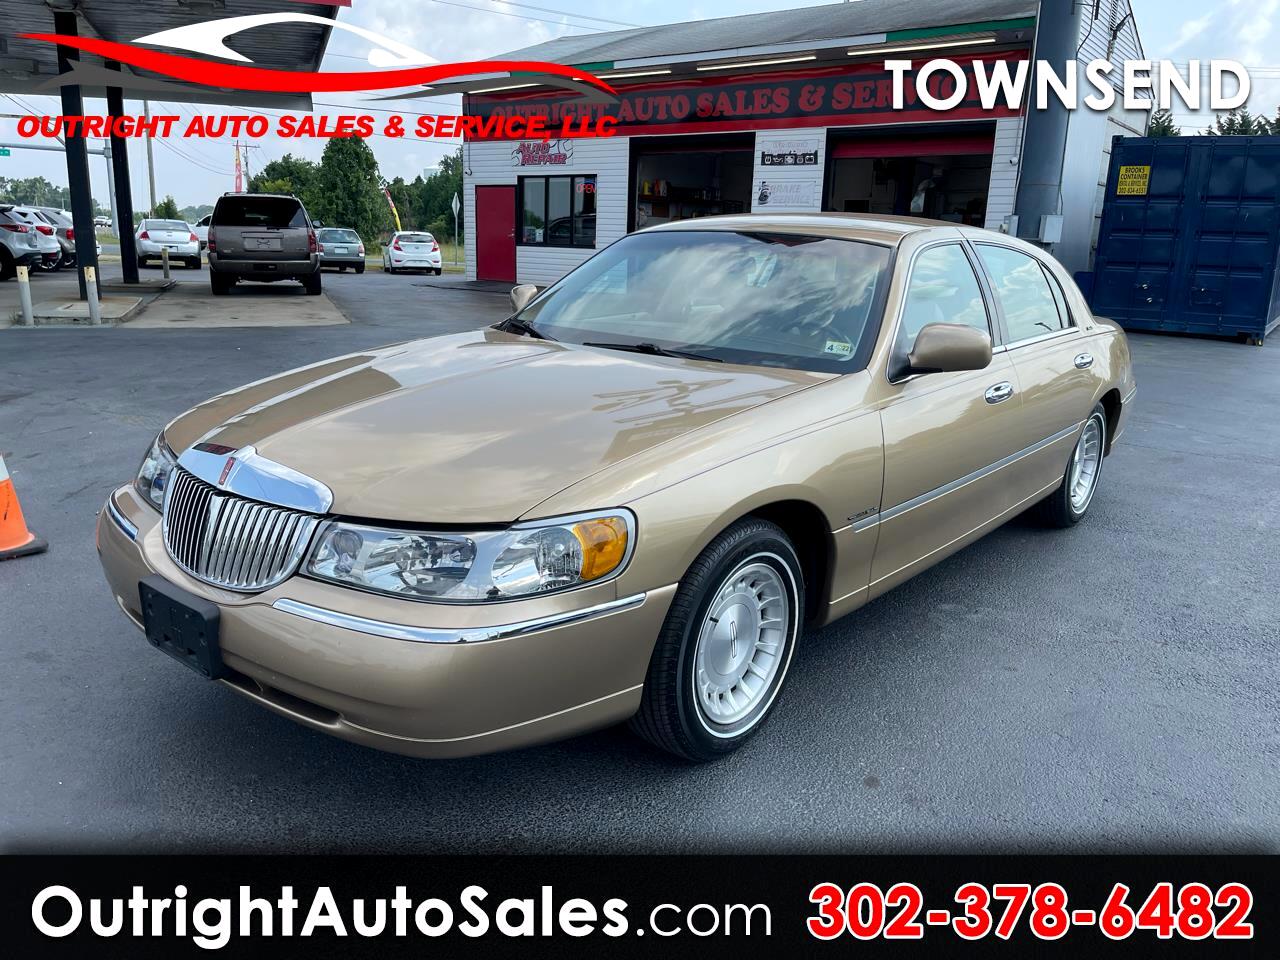 Used 1998 Lincoln Town Car EXECUTIVE for Sale in Townsend DE 19734 Outright  Auto Sales & Service, LLC